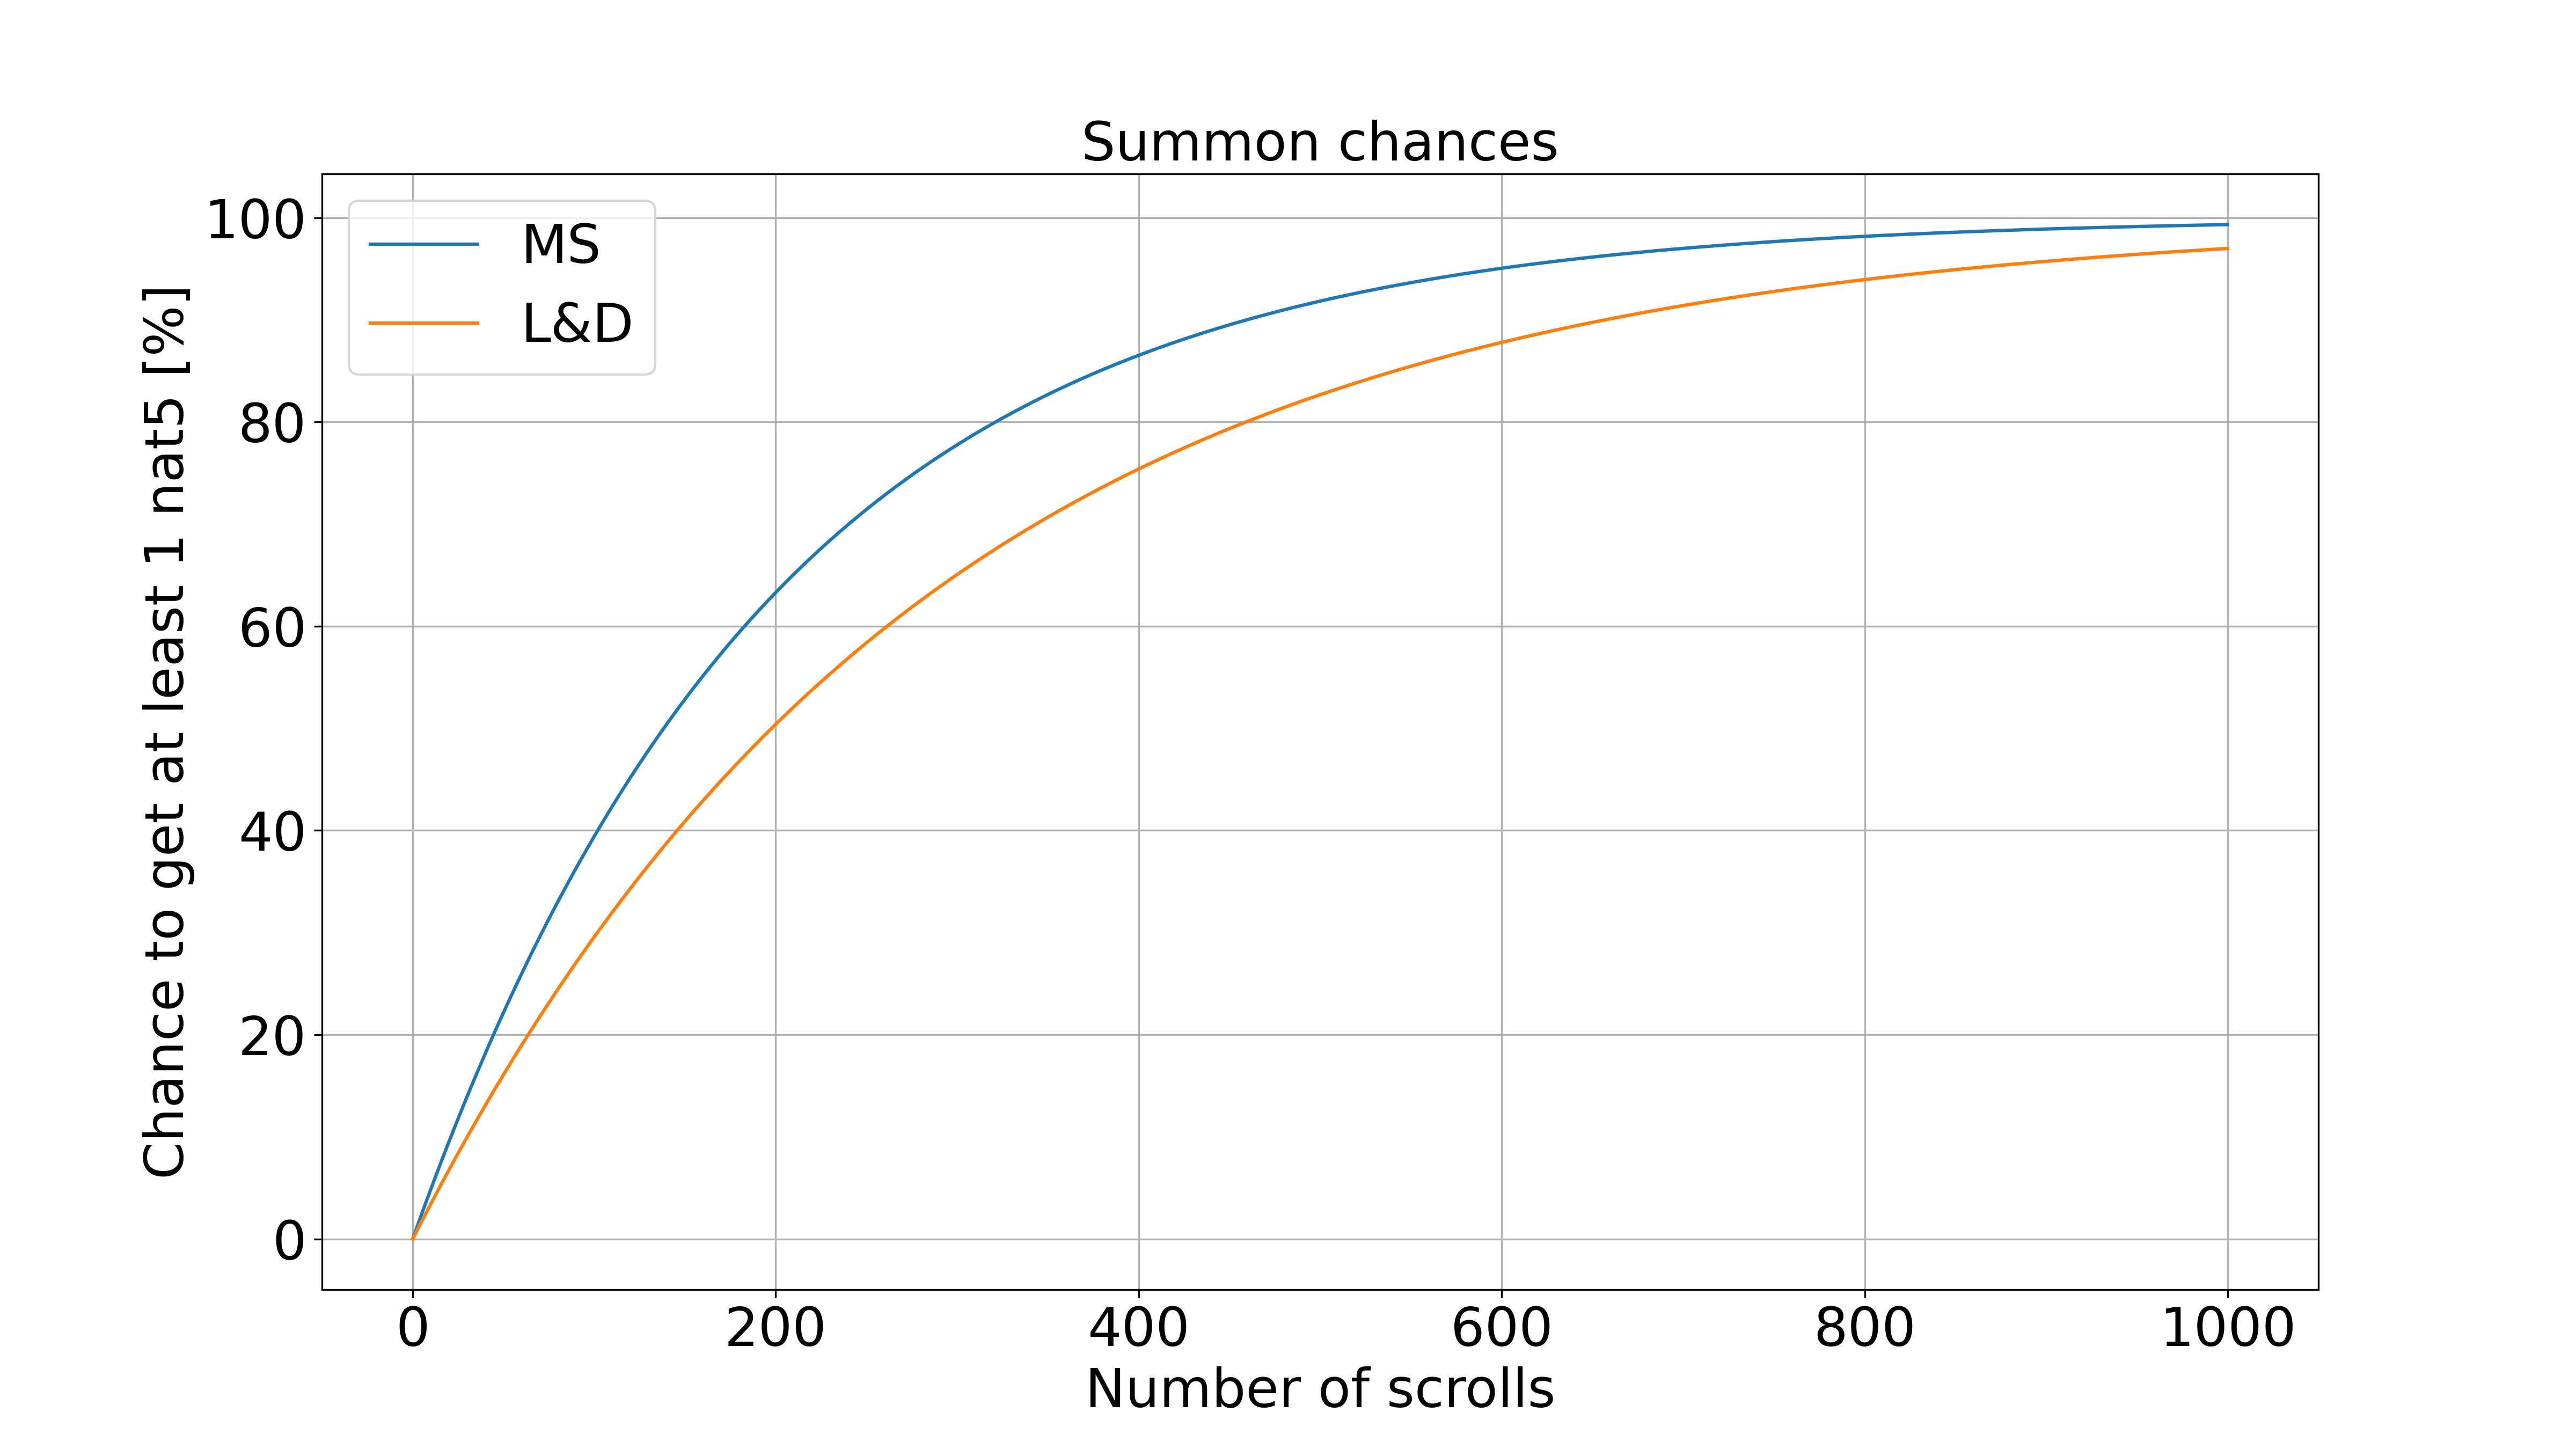 Summon chances for MS and L&D